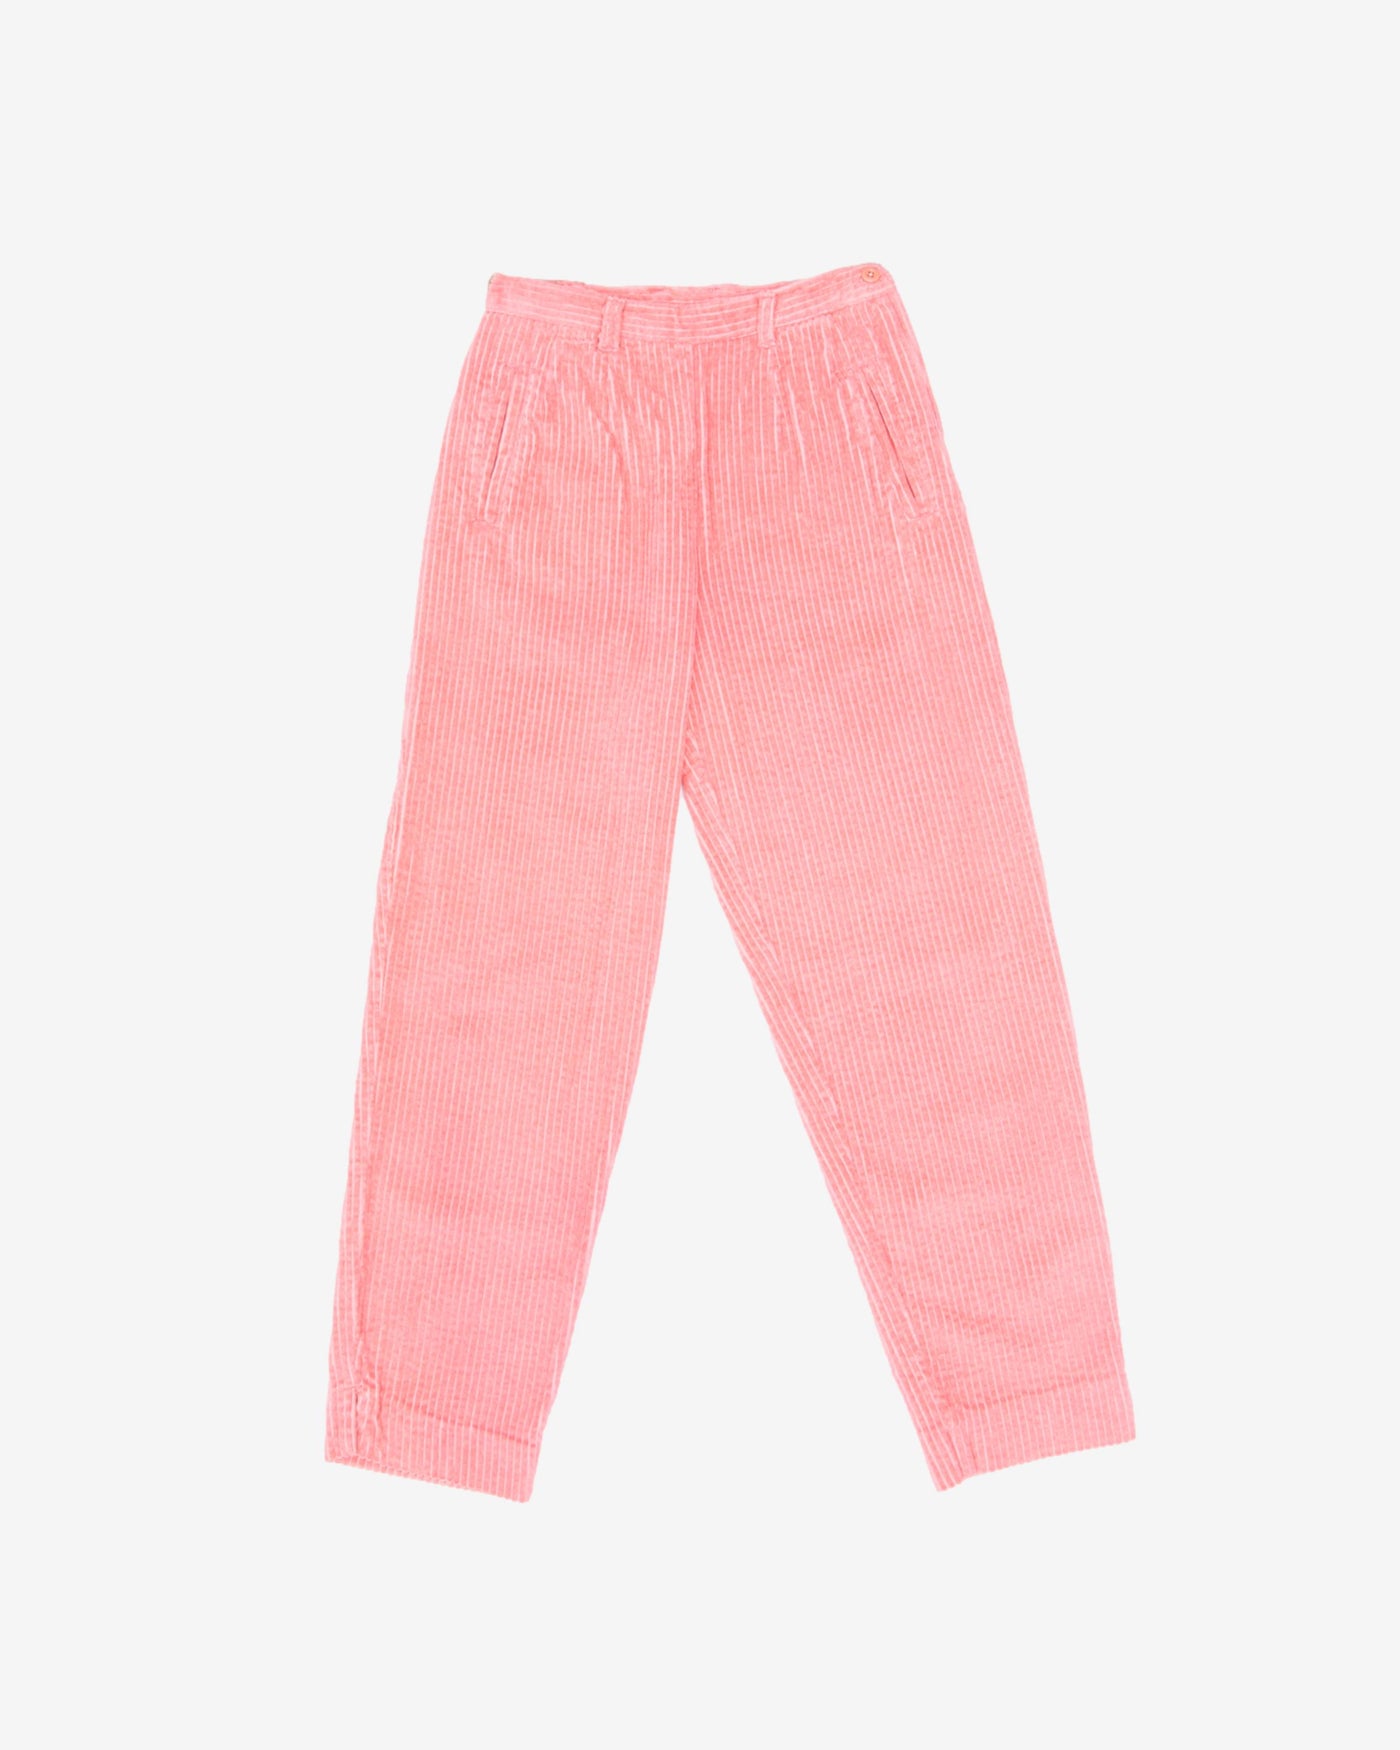 Traders Pink Cord Tapered Trousers -  W24 L27